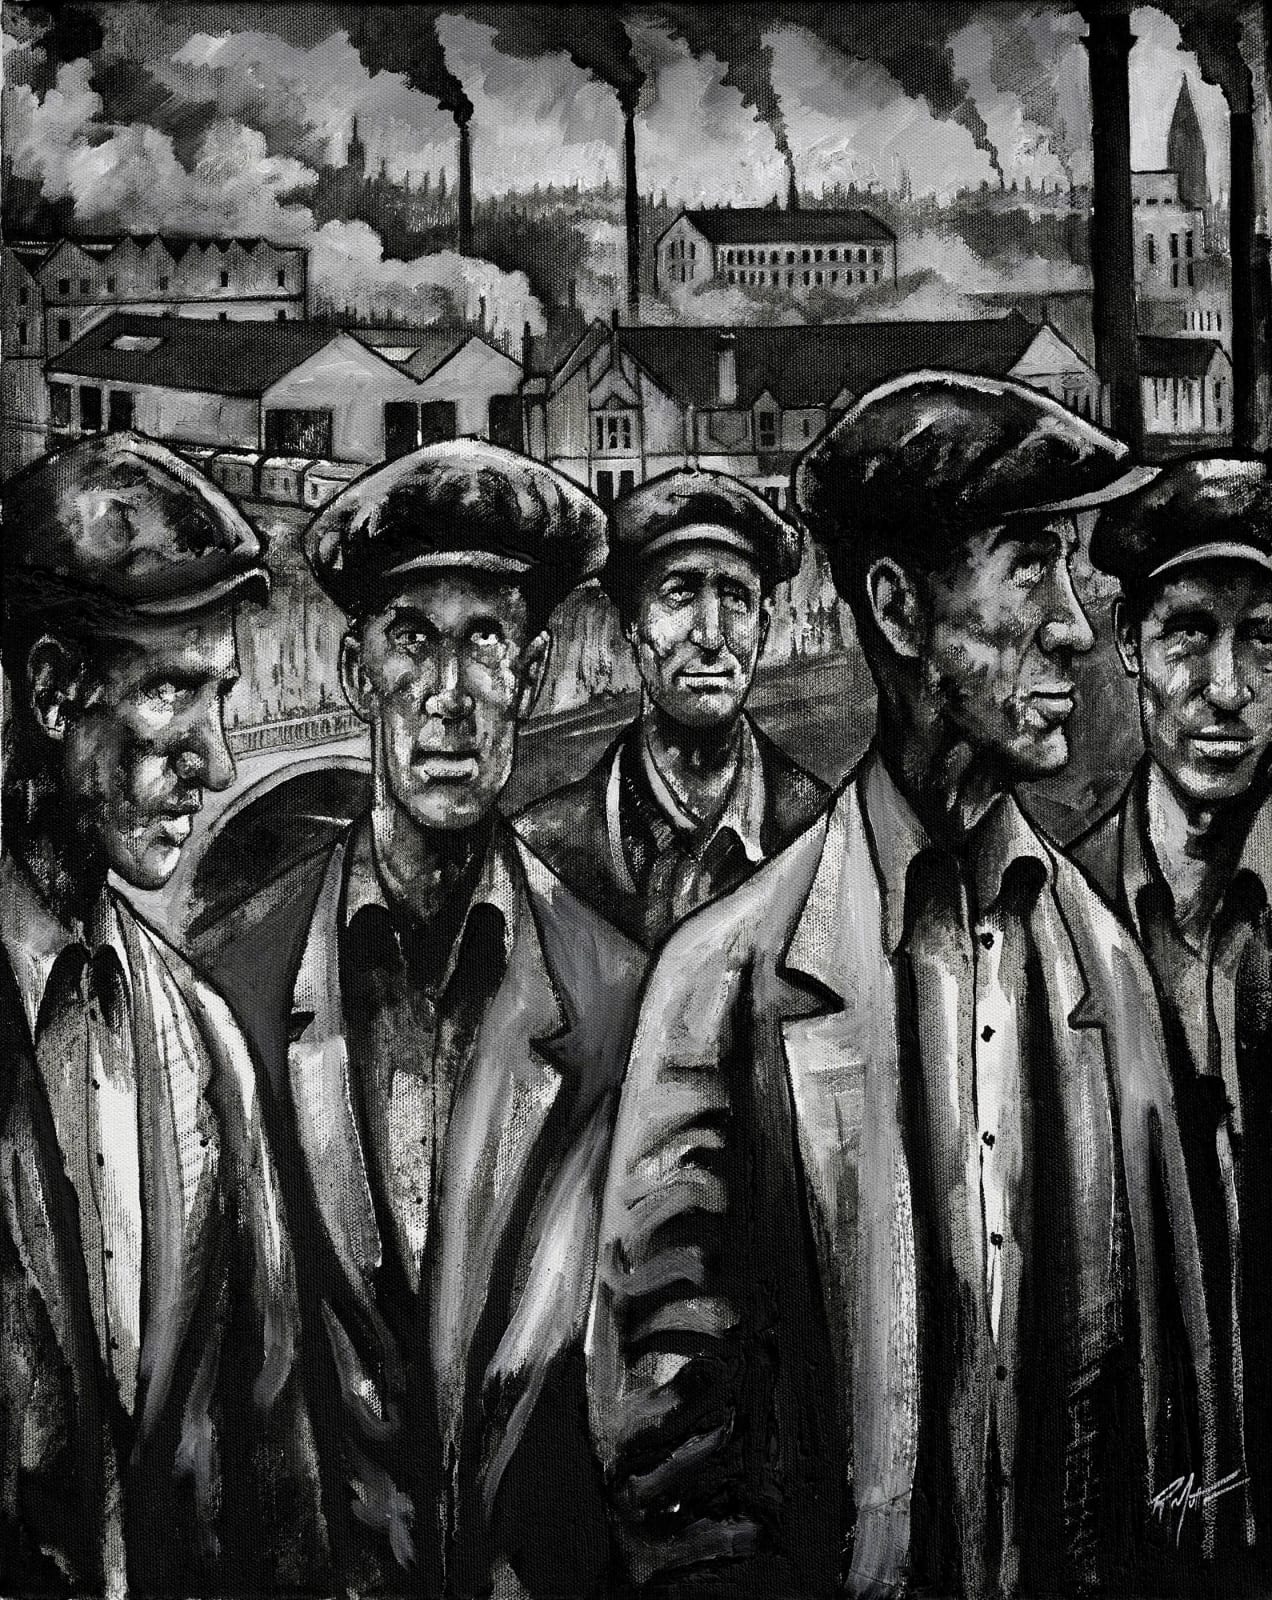 Ryan Mutter, Faces and Factories